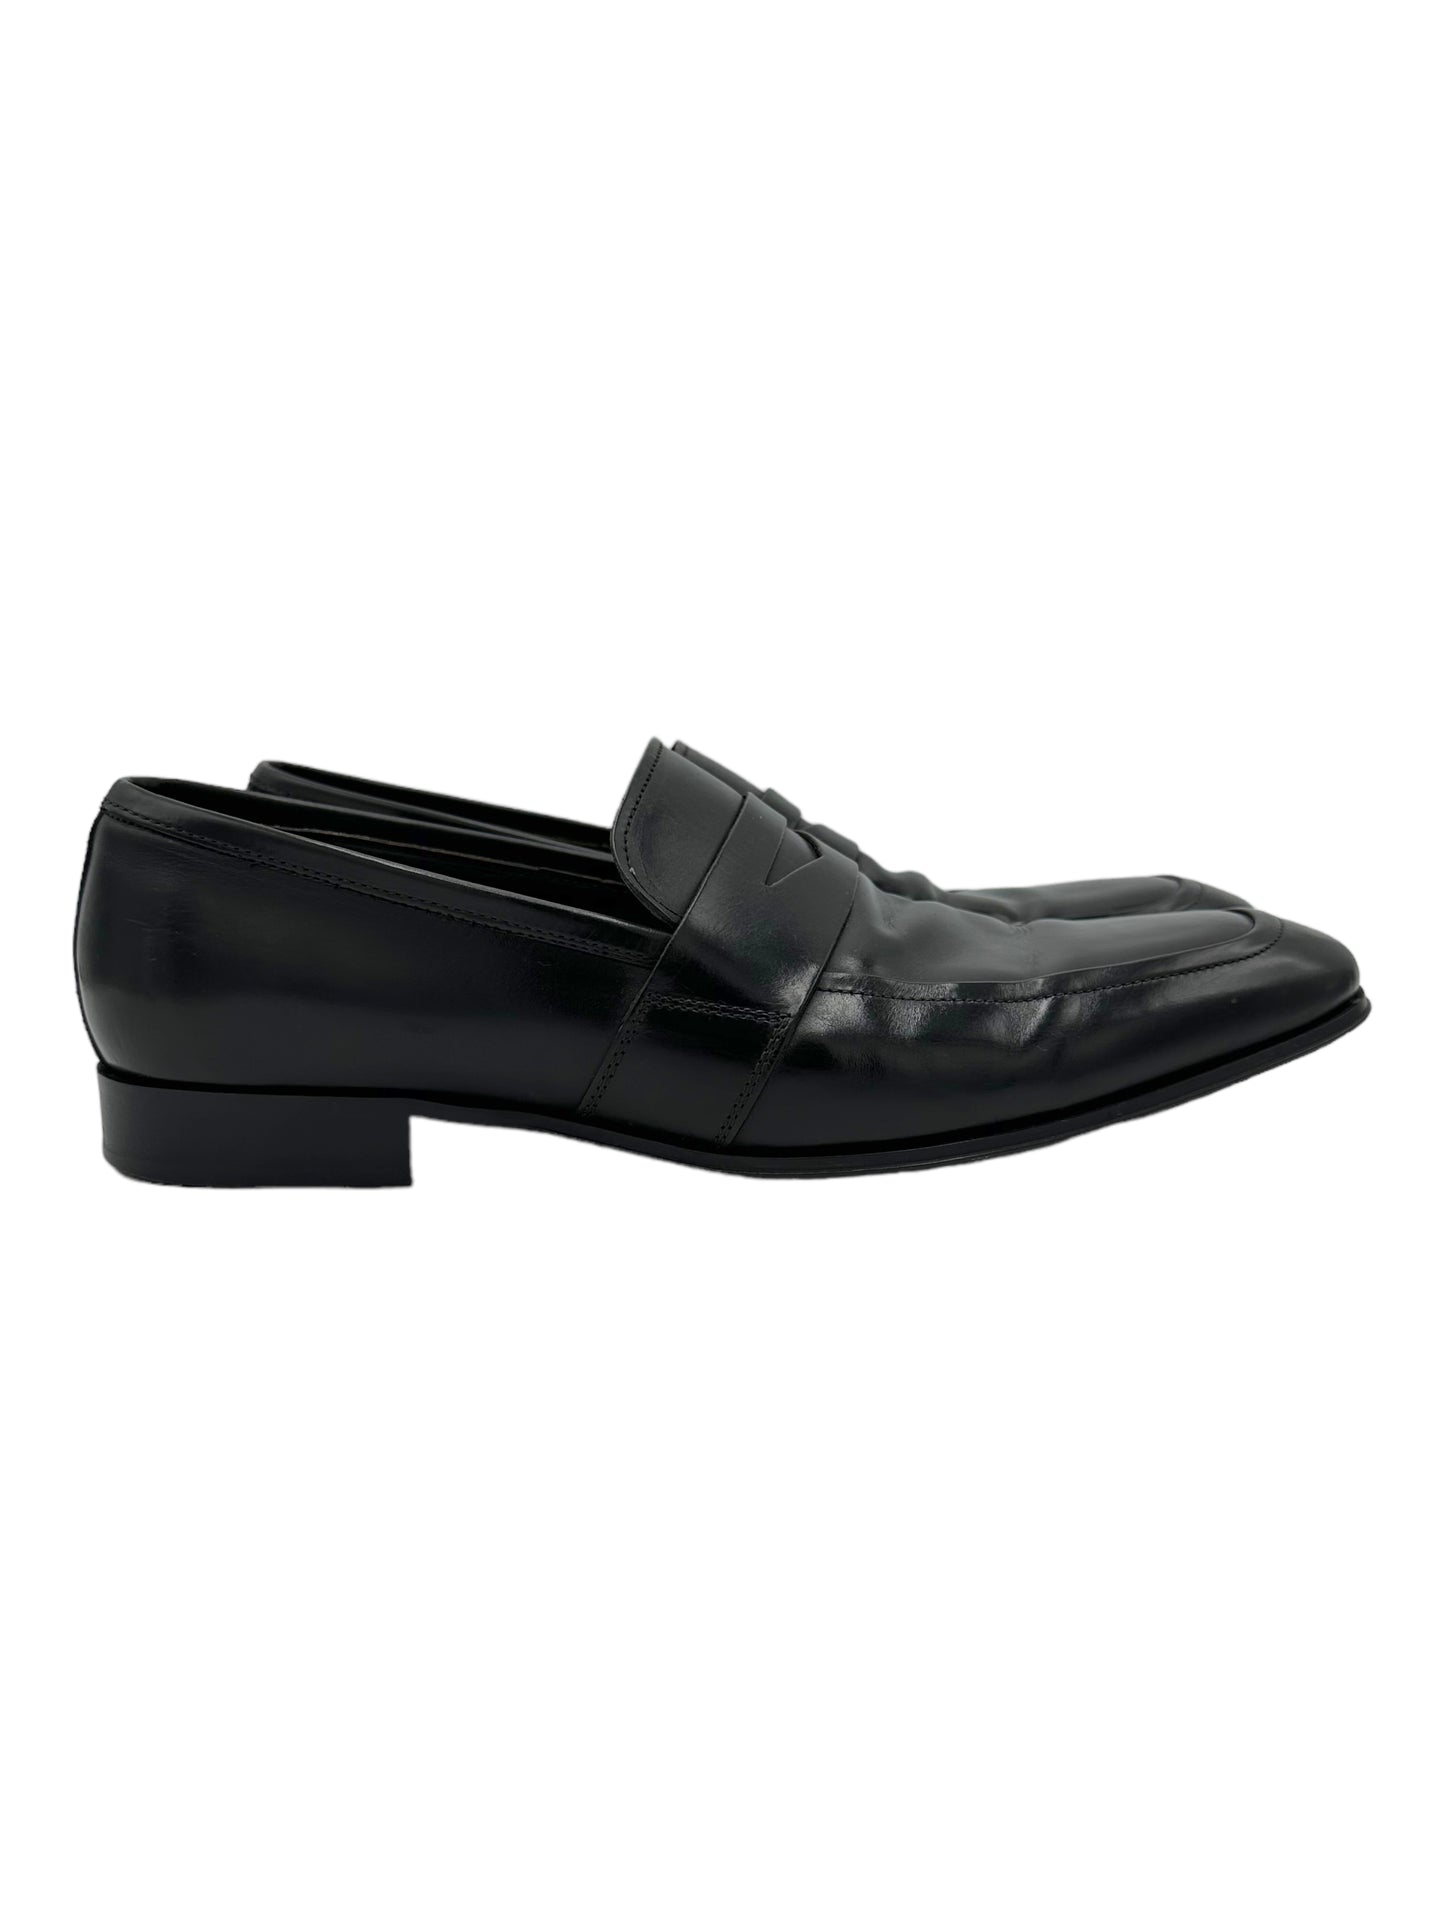 To Boot New York Black Leather Penny Loafers - Genuine Design Luxury Consignment Calgary, Alberta, Canada New and Pre-Owned Clothing, Shoes, Accessories.